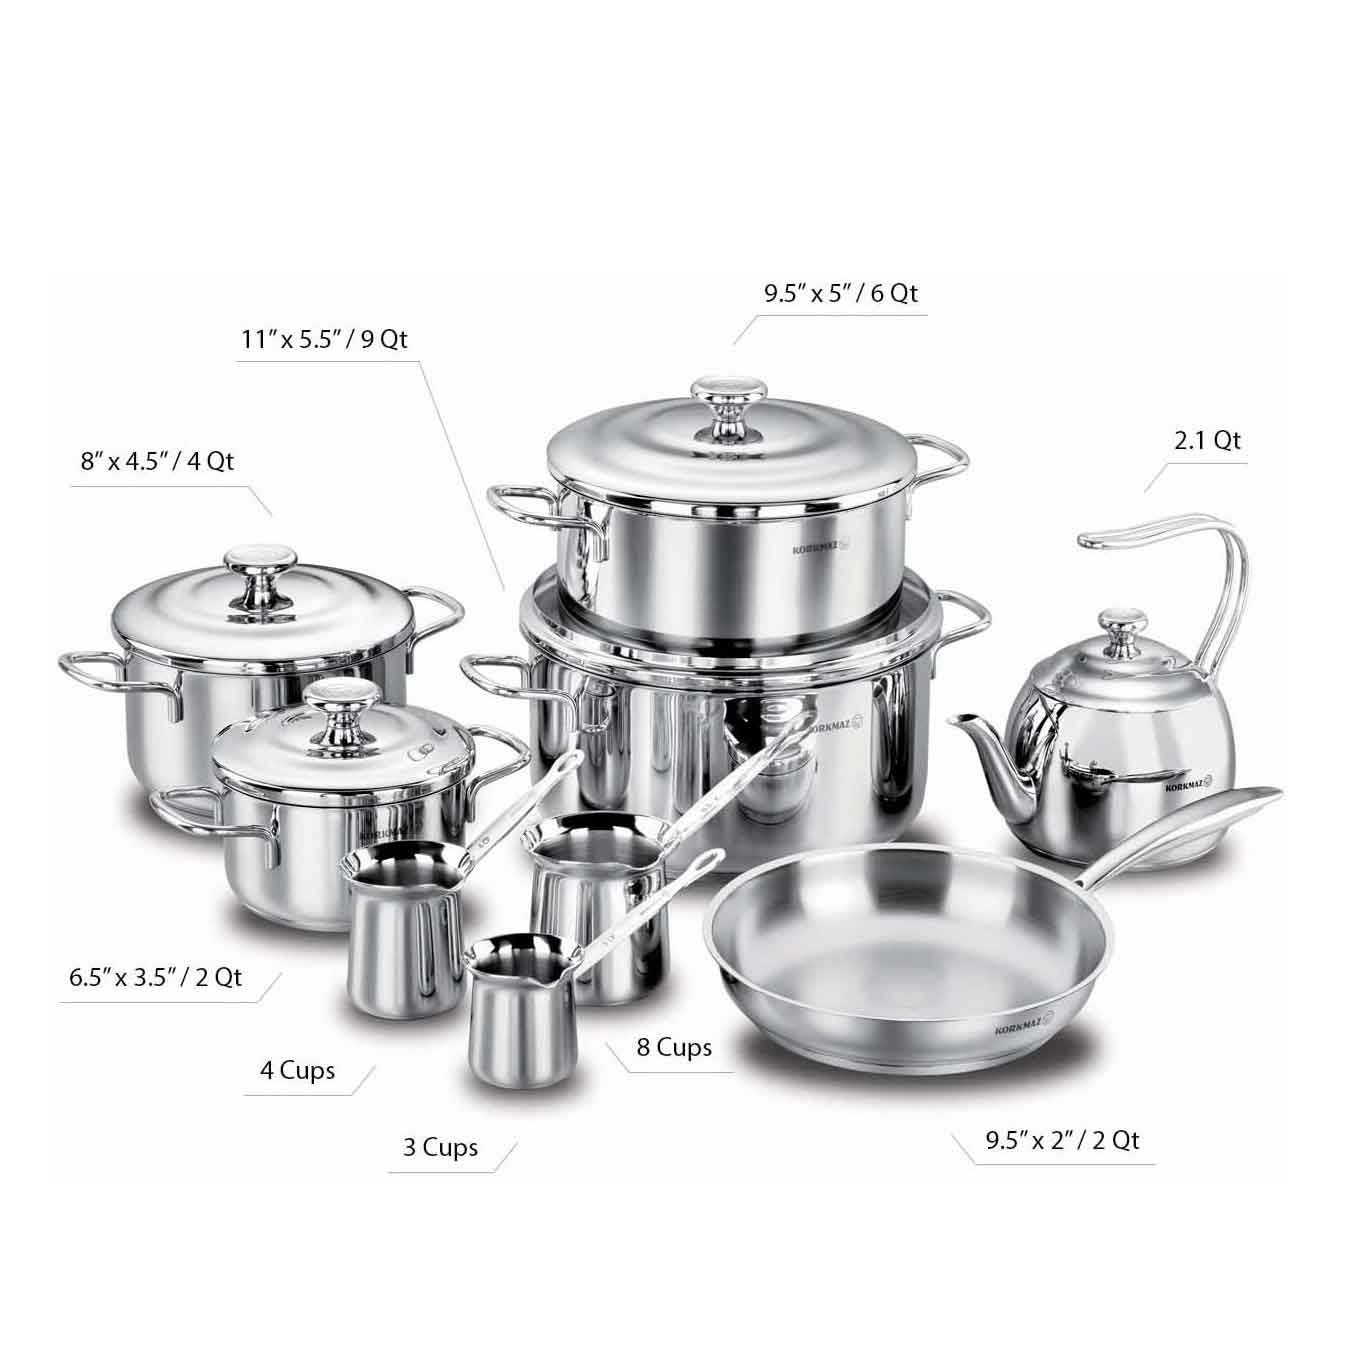 Korkmaz Droppa Quart High-End Stainless Steel Induction-Ready